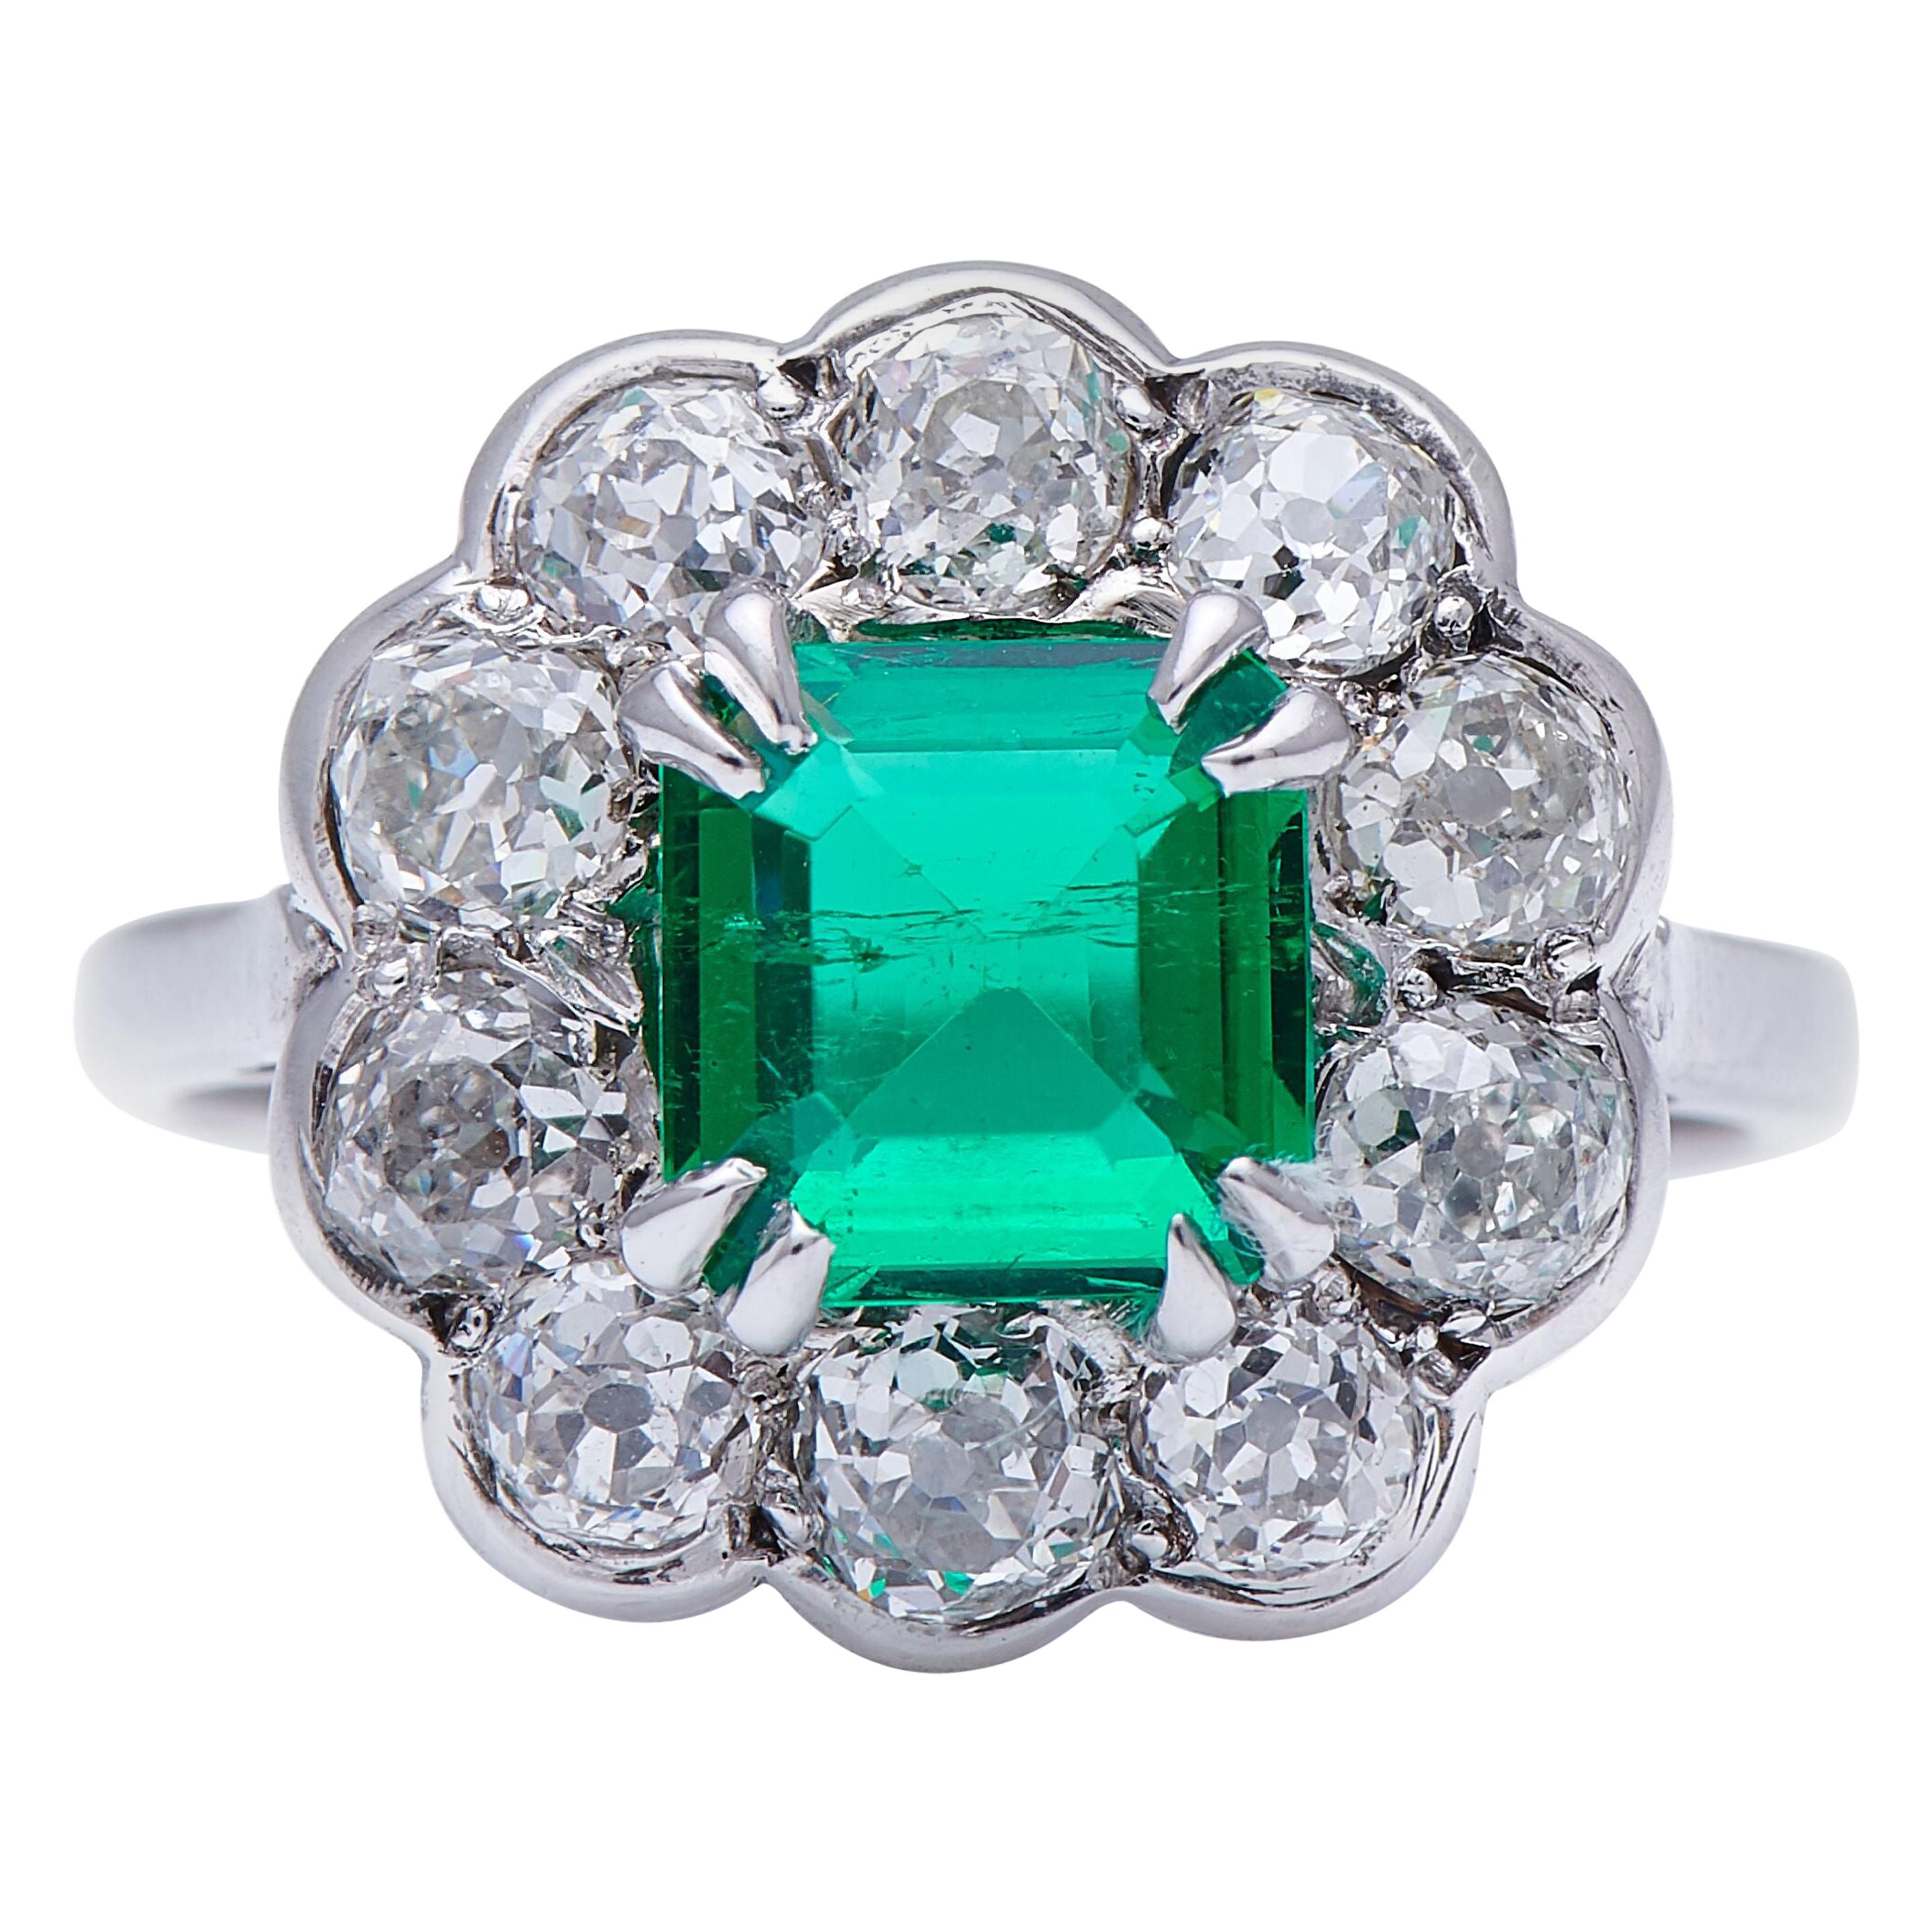 Midcentury, 1940s 18 Carat White Gold Colombian Emerald and Diamond Cluster Ring